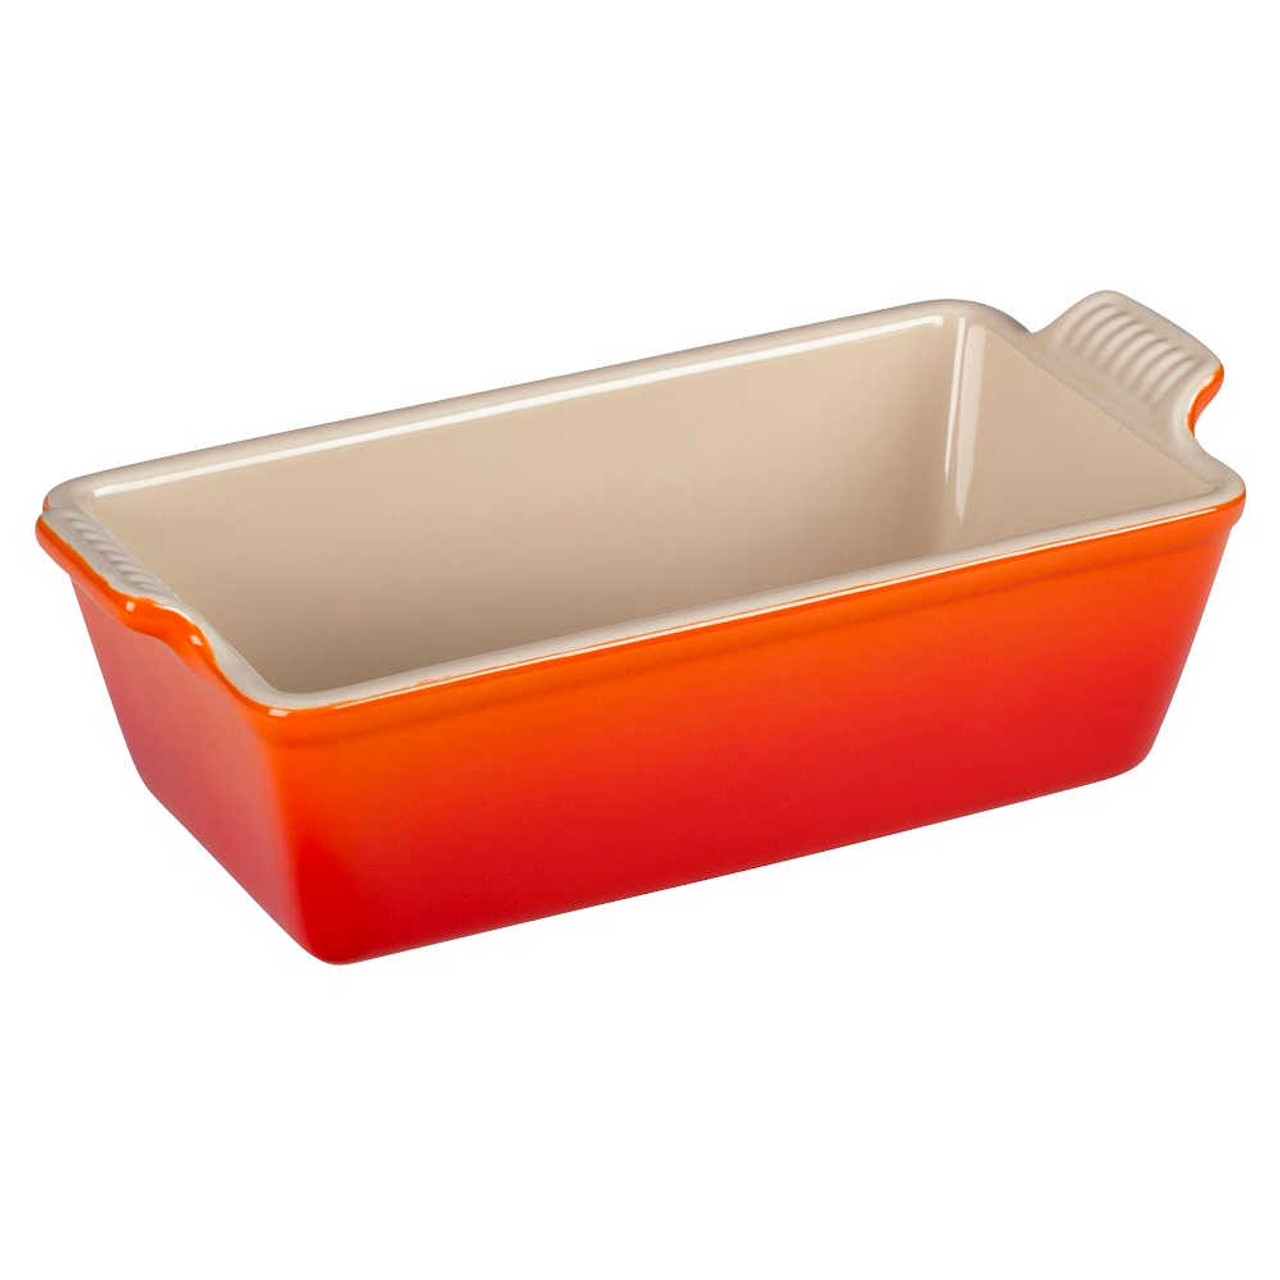 https://cdn11.bigcommerce.com/s-hccytny0od/images/stencil/1280x1280/products/4465/17642/Le_Creuset_Heritage_Loaf_Pan_in_Flame__81994.1642040934.jpg?c=2?imbypass=on